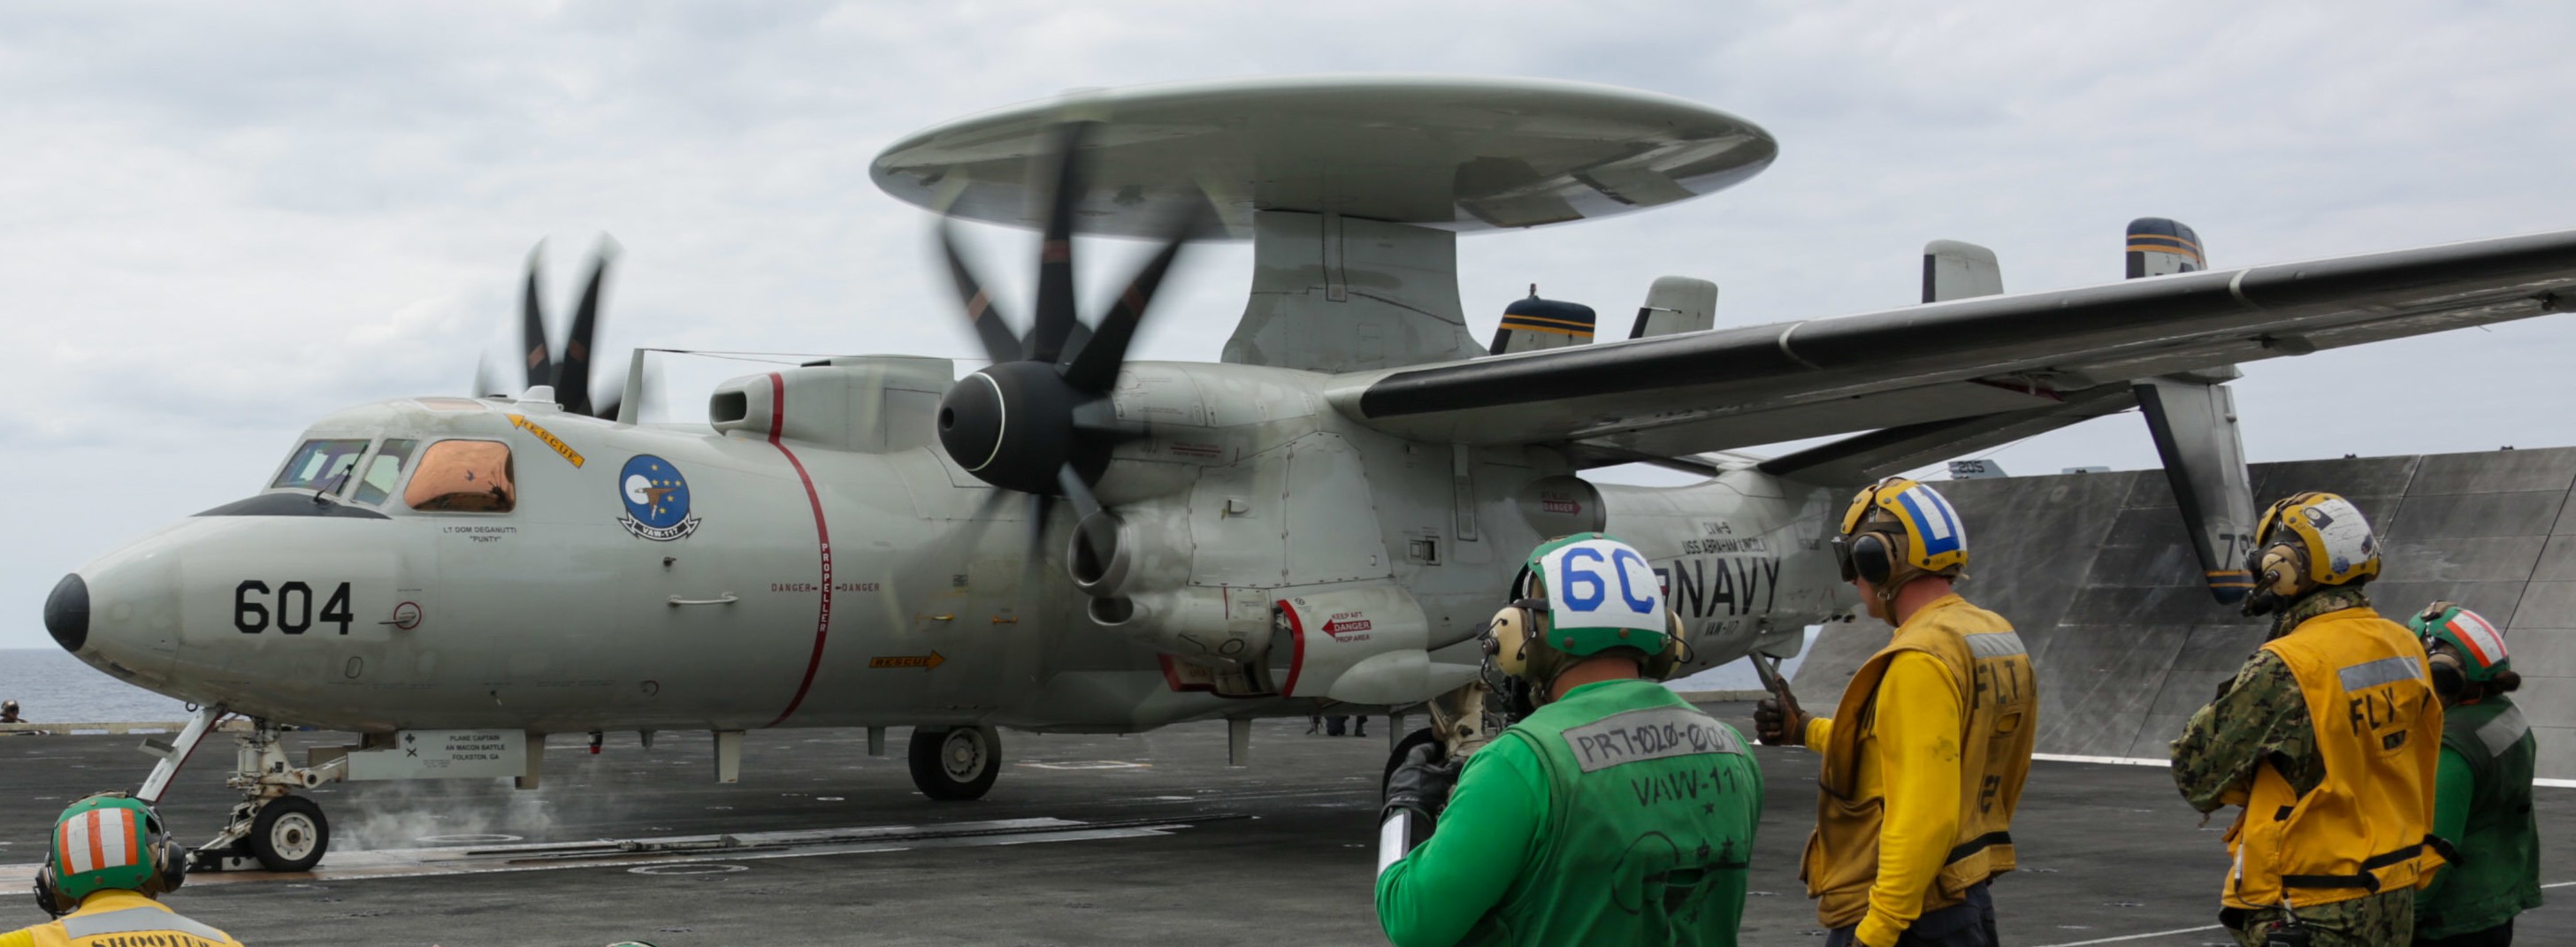 vaw-117 wallbangers airborne command and control squadron navy e-2d advanced hawkeye cvw-9 uss abraham lincoln cvn-72 28